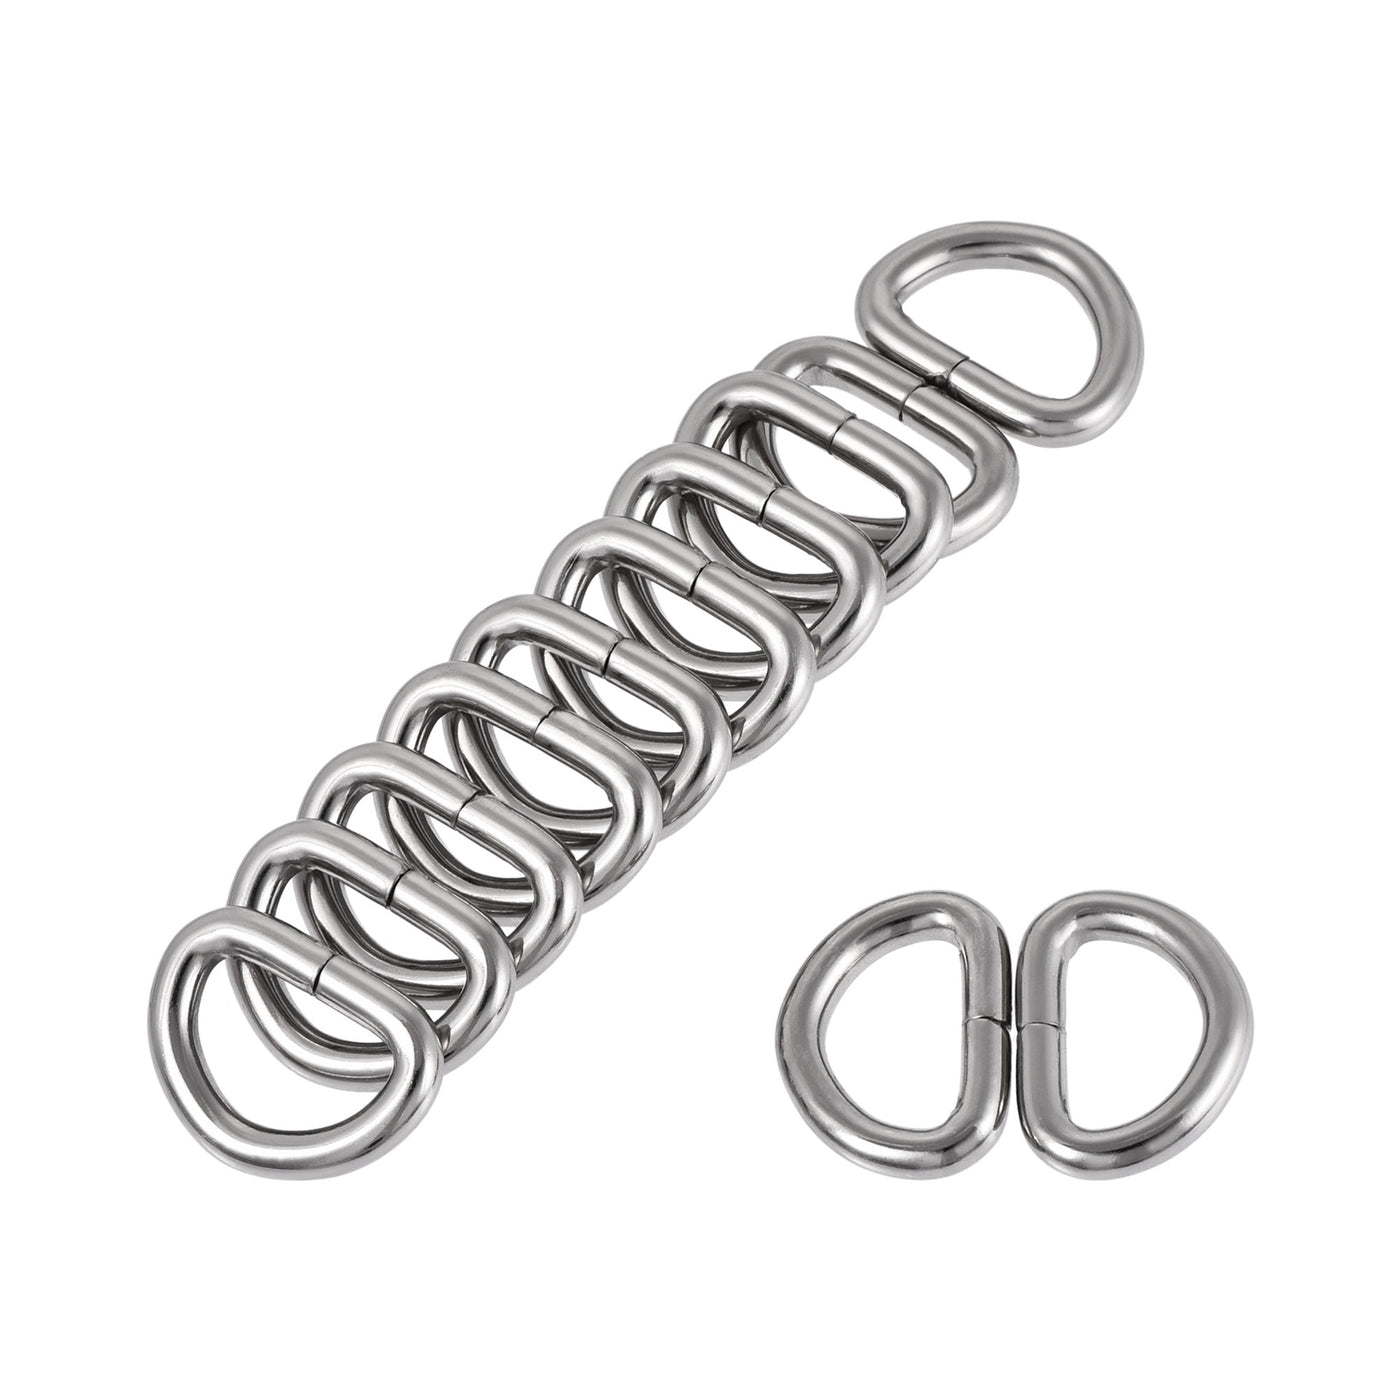 uxcell Uxcell Metal D Ring 0.63"(16mm) D-Rings Buckle for Hardware Bags Belts Craft DIY Accessories Silver Tone 100pcs